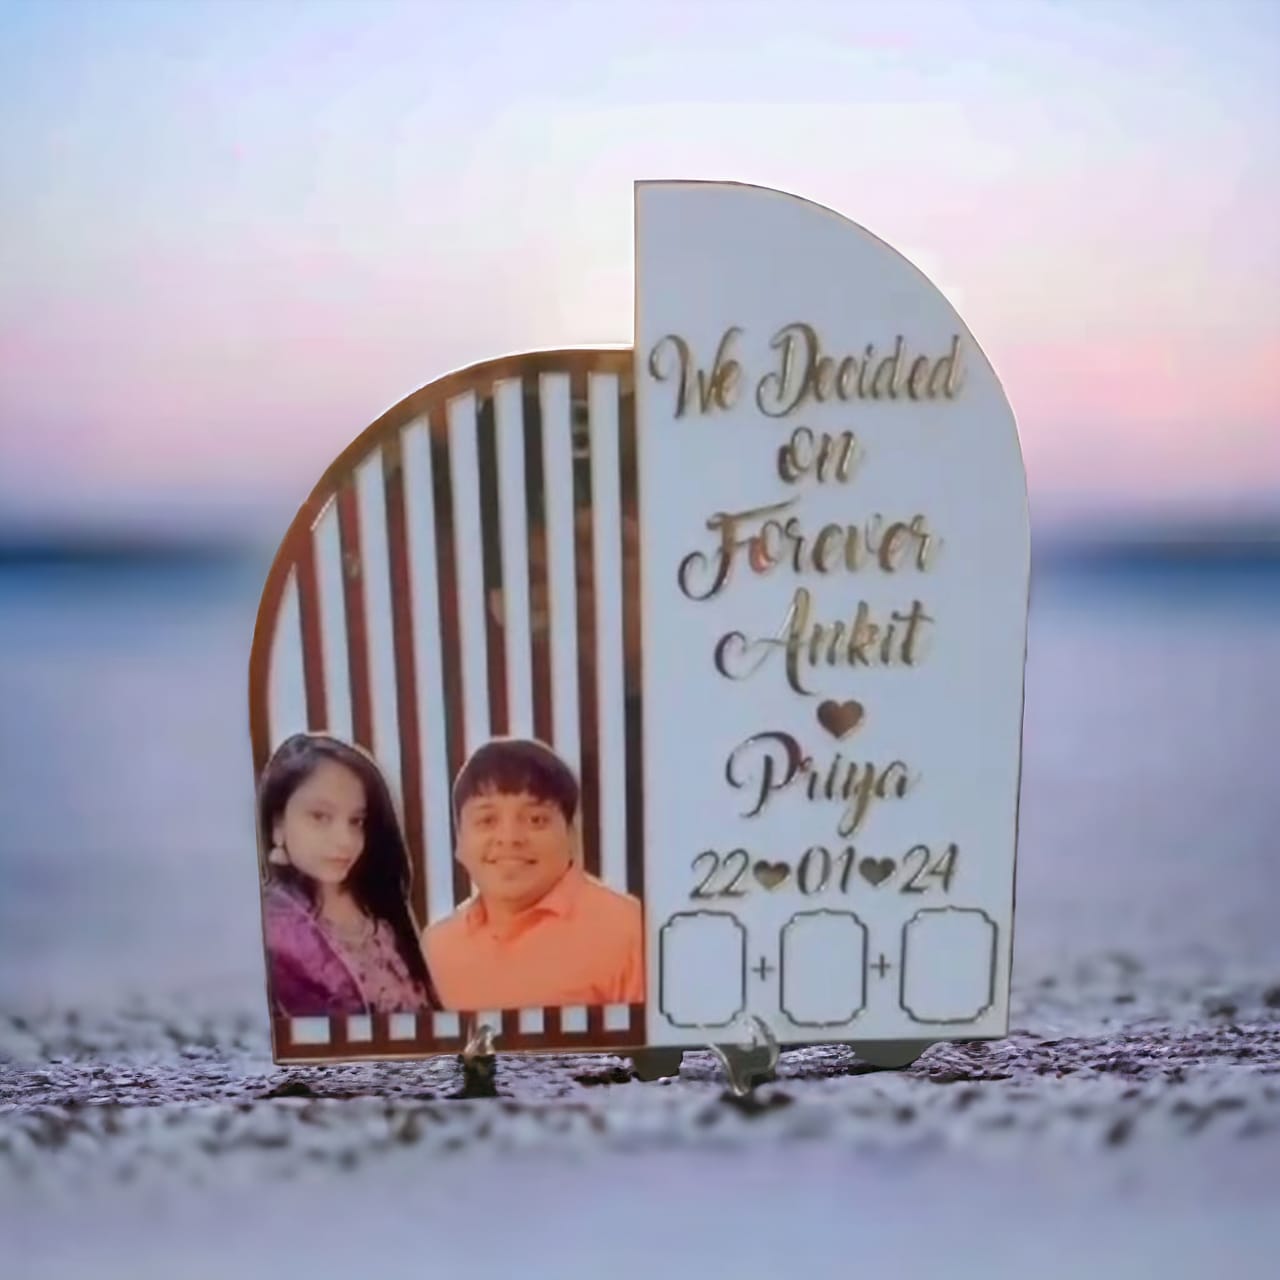 Buy Personalized Wedding Gift Newly Weds Gift Picture Frame Online in India  - Etsy